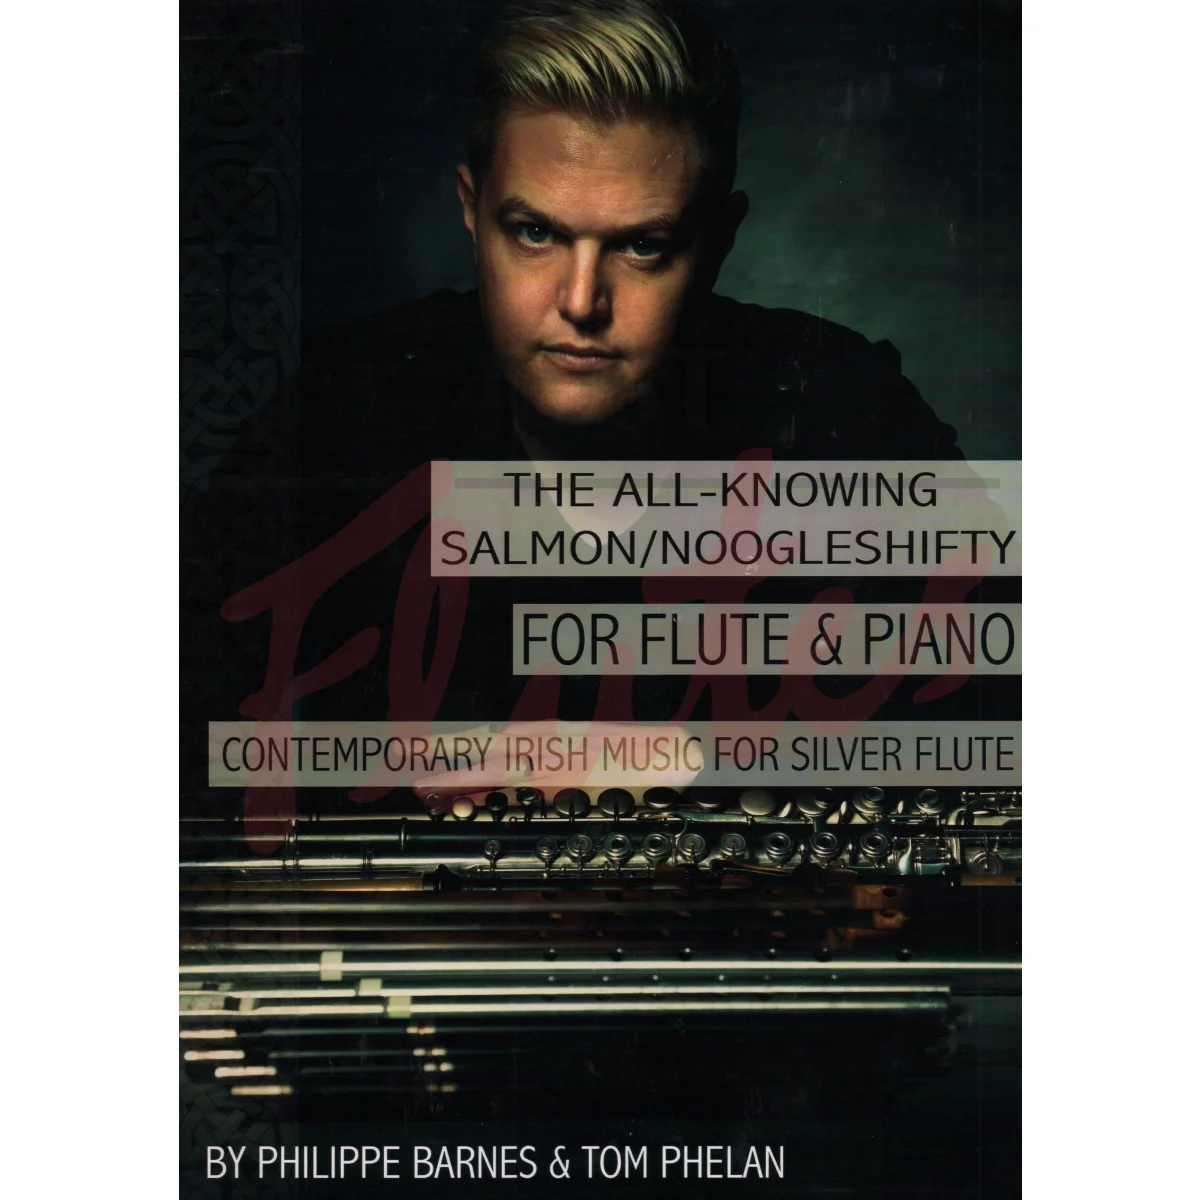 The All-Knowing Salmon/Noogleshifty for Flute and Piano